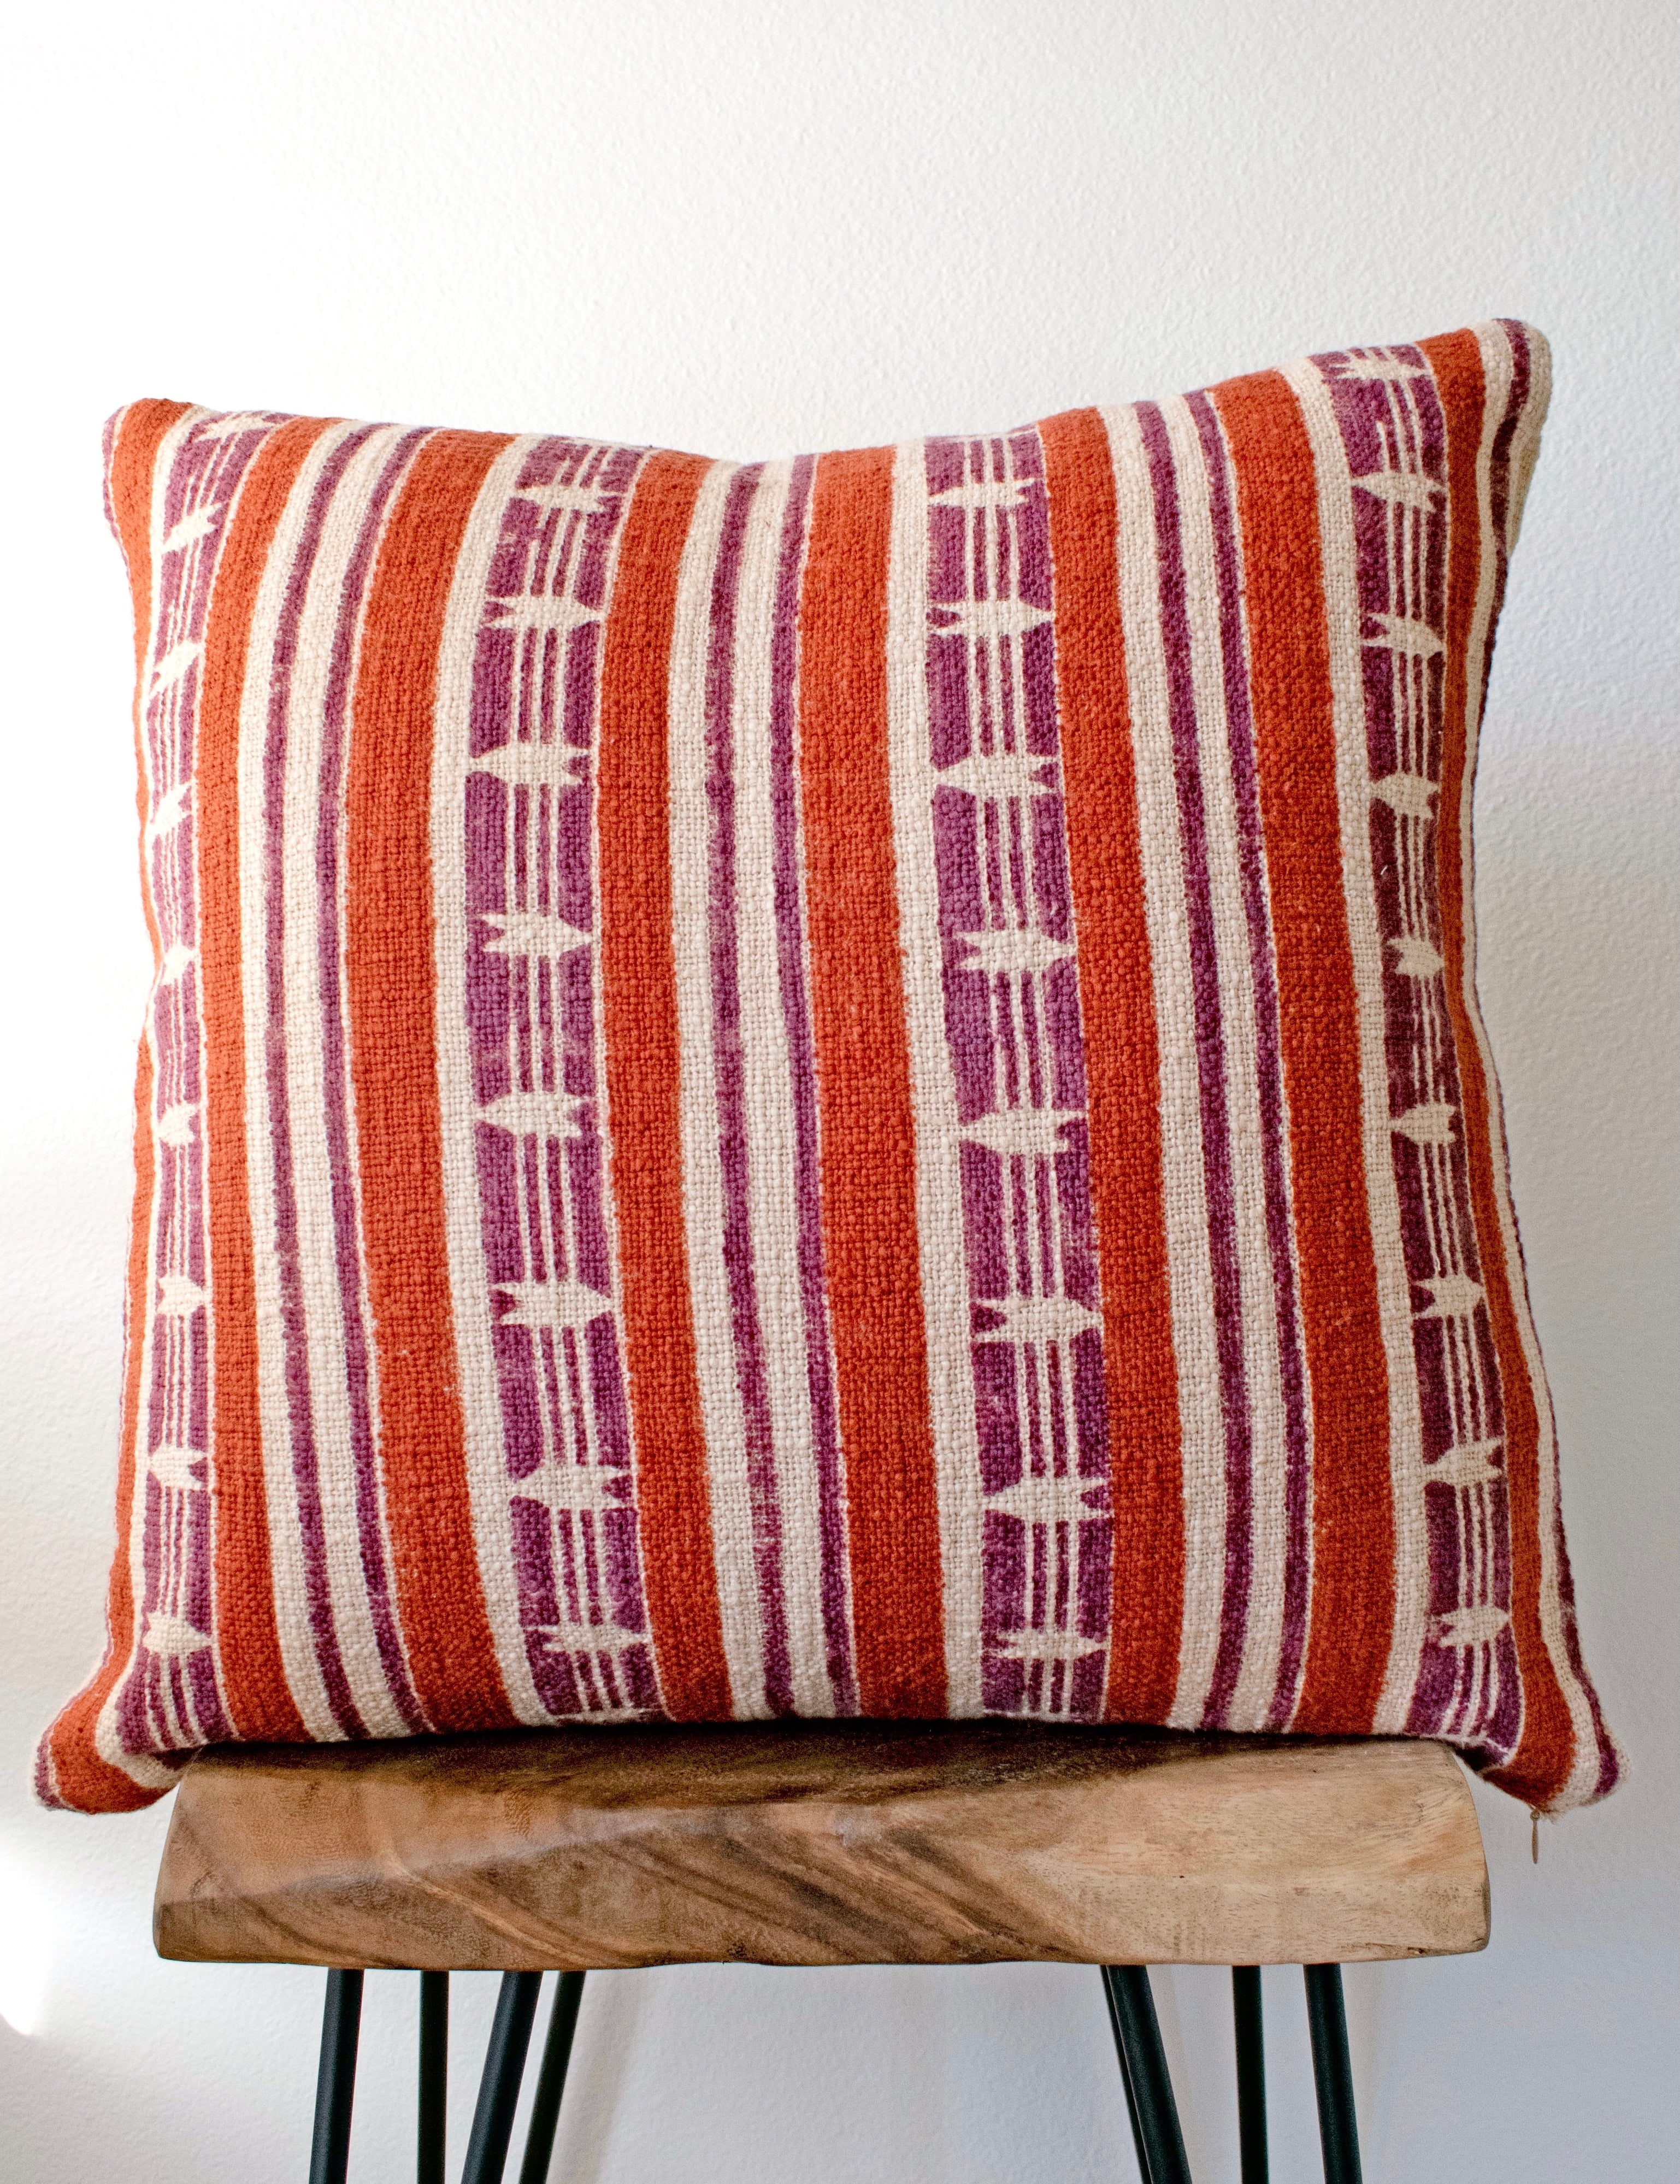 Mojave block print pillow on a stool against white